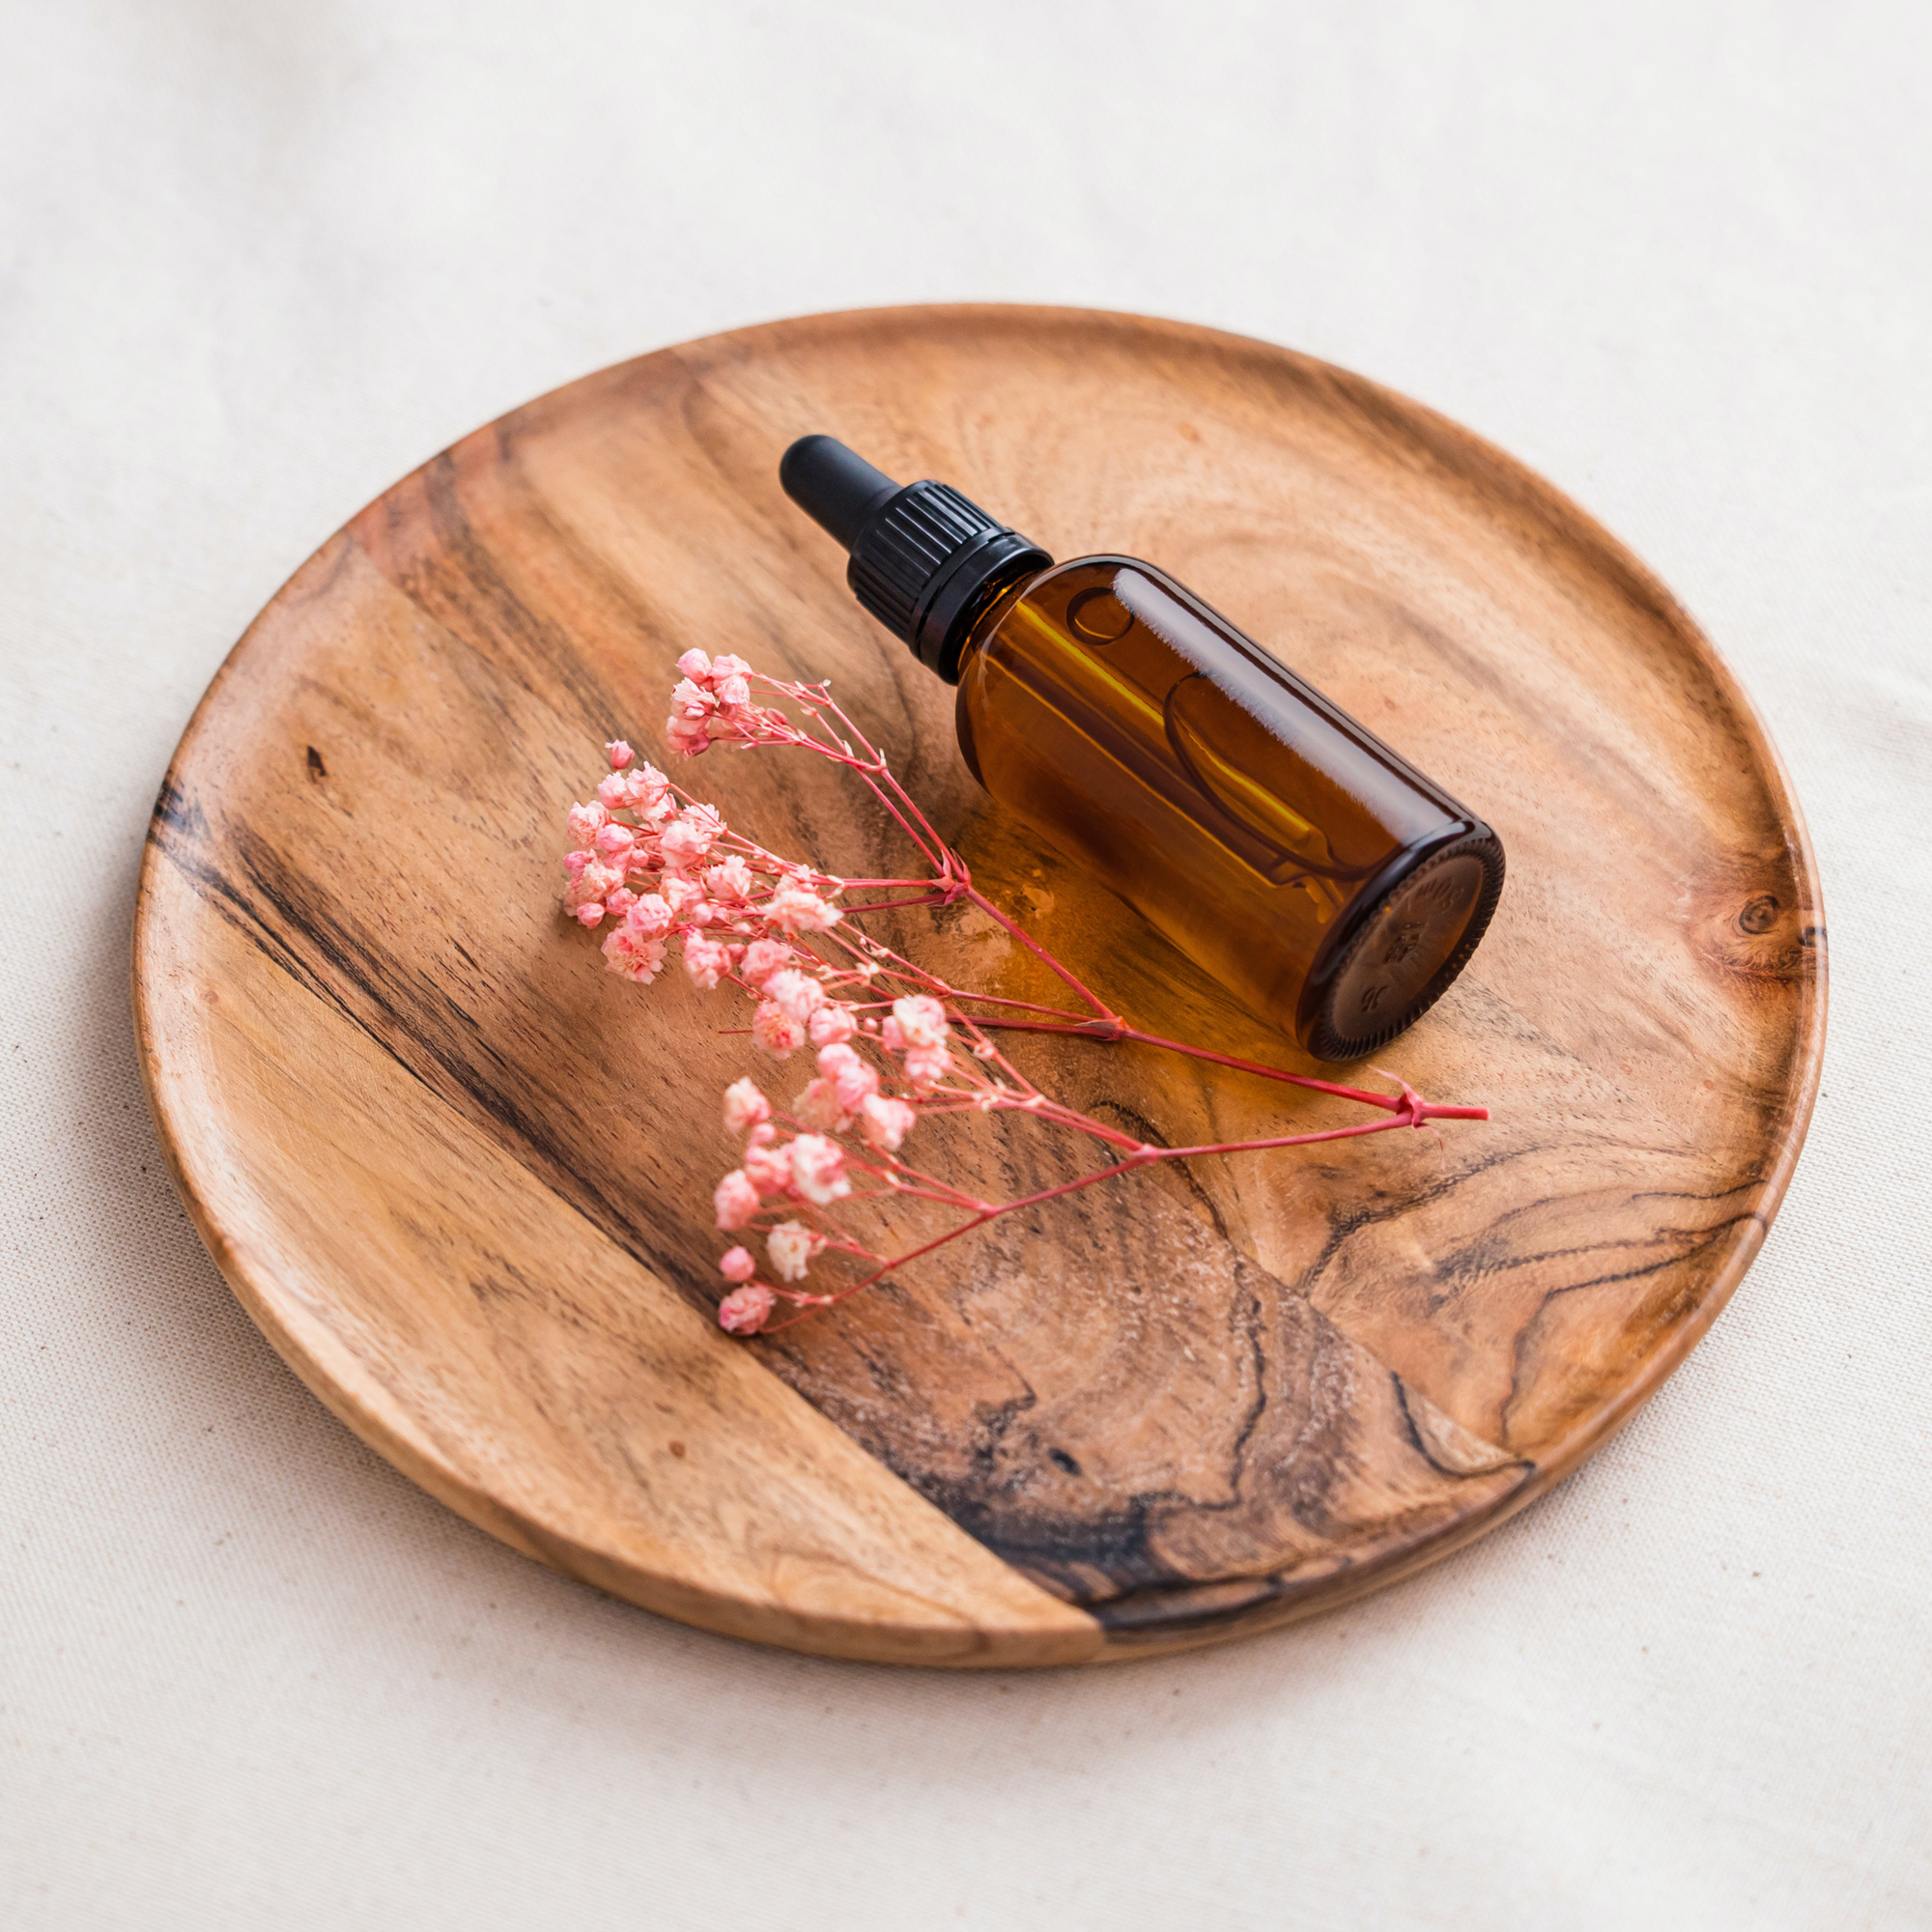 Brown bottle and pink flowers on a wooden surface.